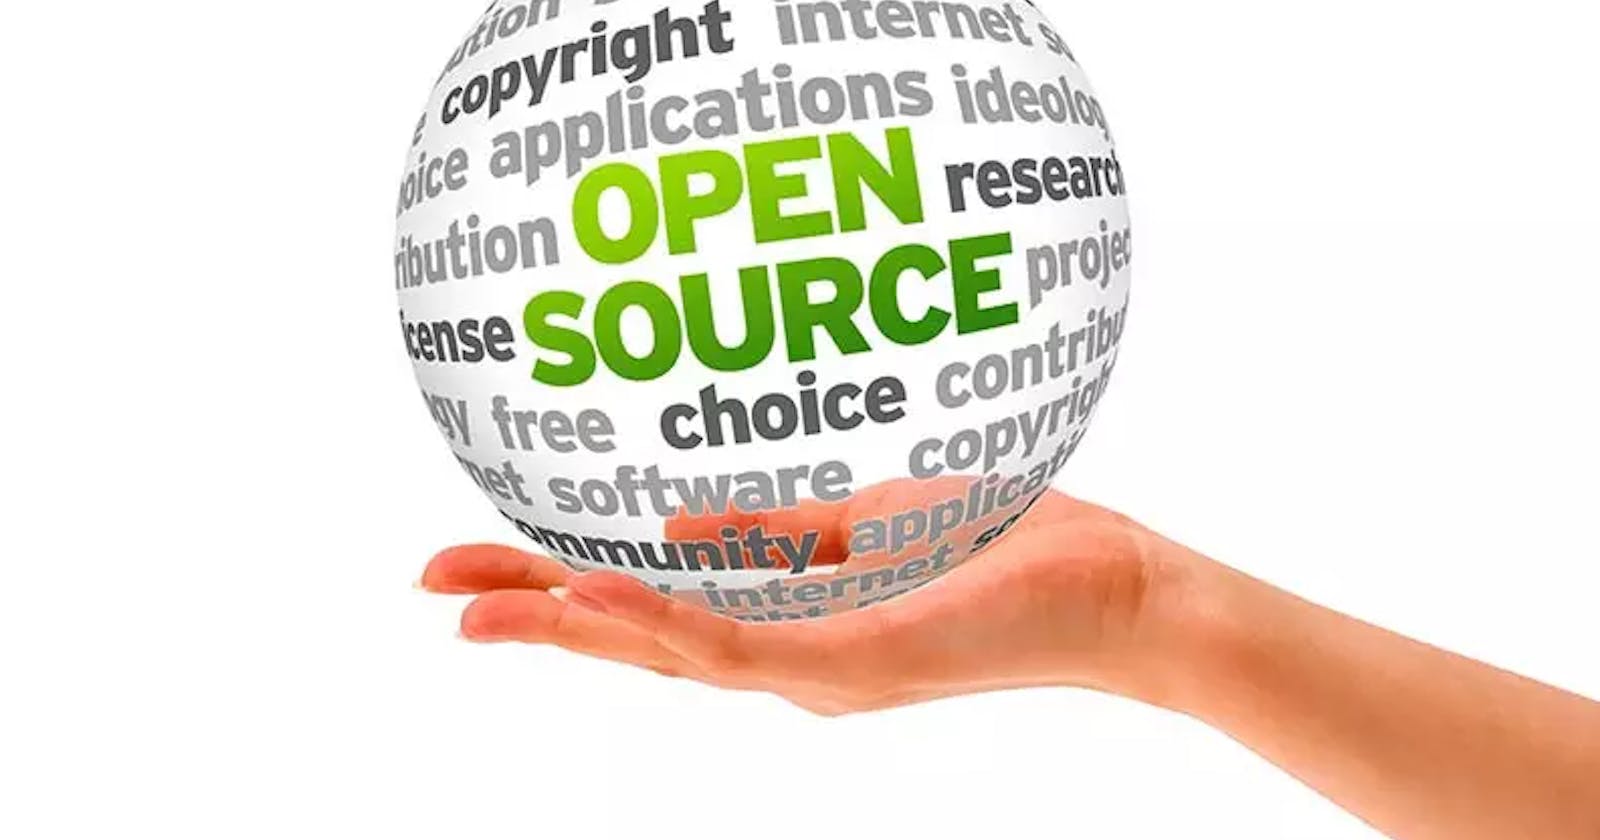 8 resources to start with opensource immediately